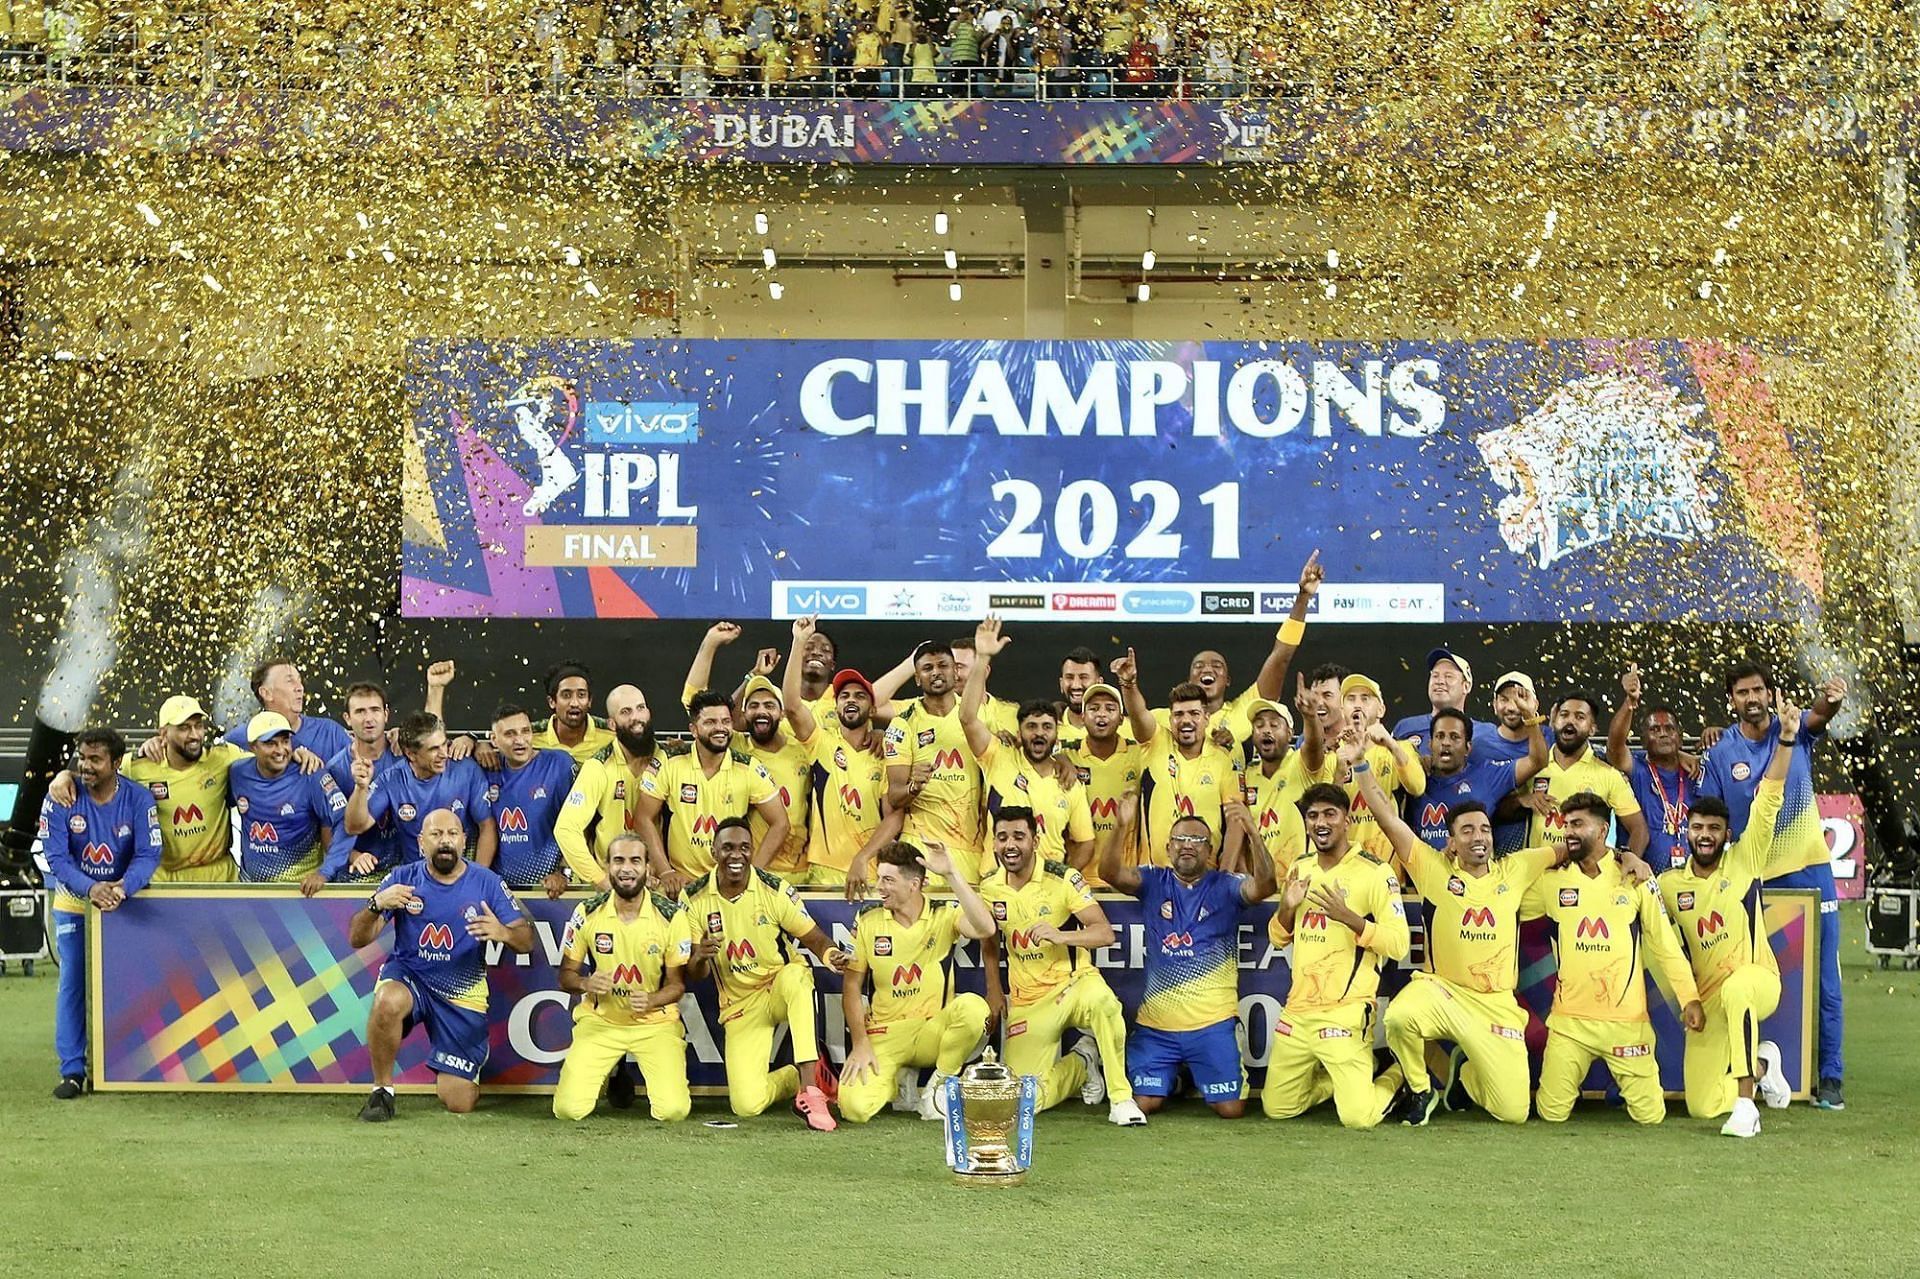 Chennai Super Kings will be the defending champions in IPL 2022 (Image: IPL)